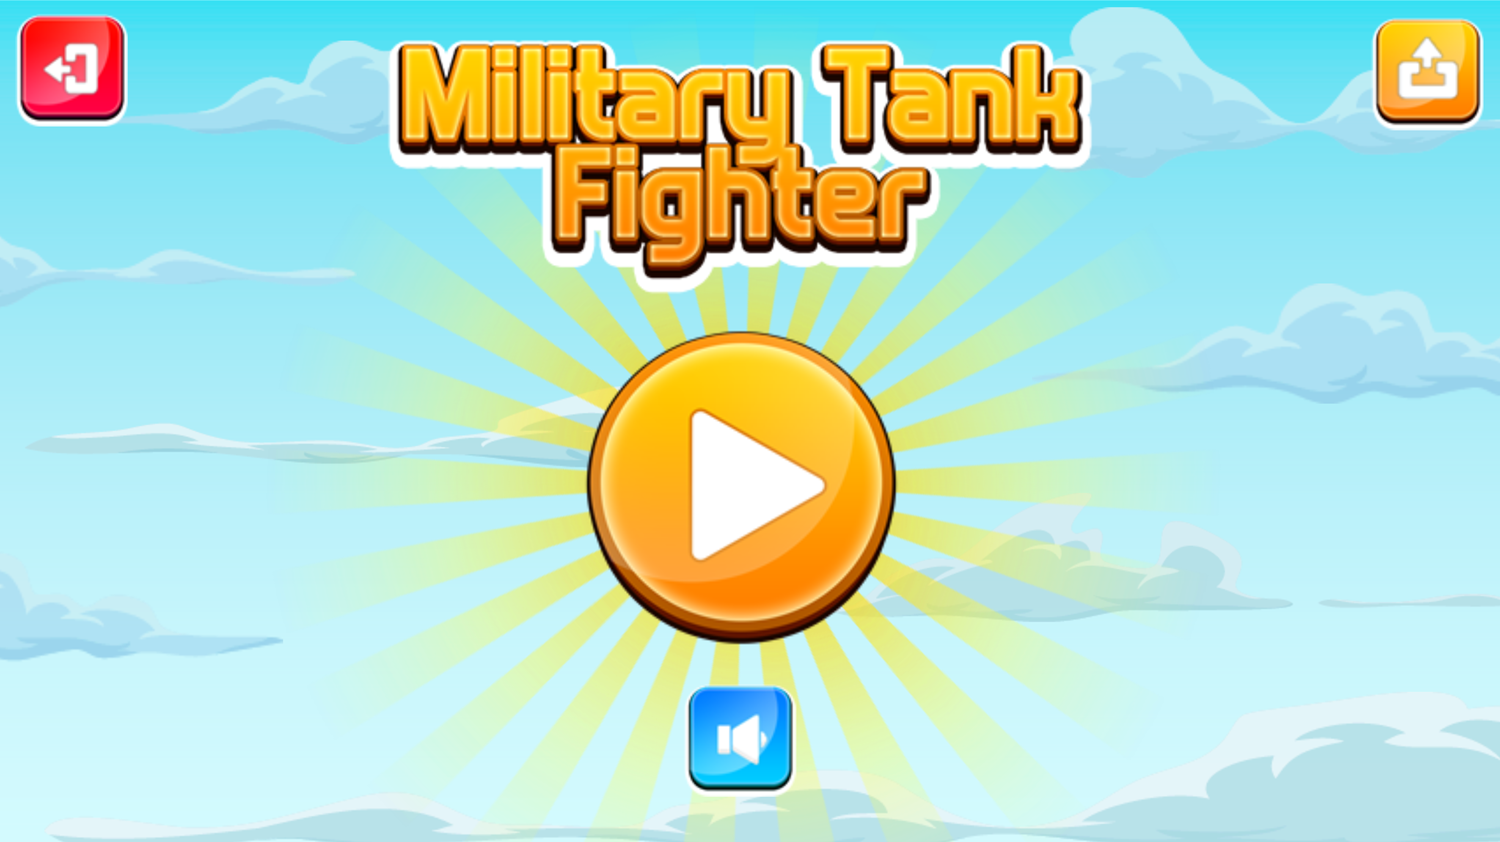 Military Tank Fighter Game Welcome Screenshot.